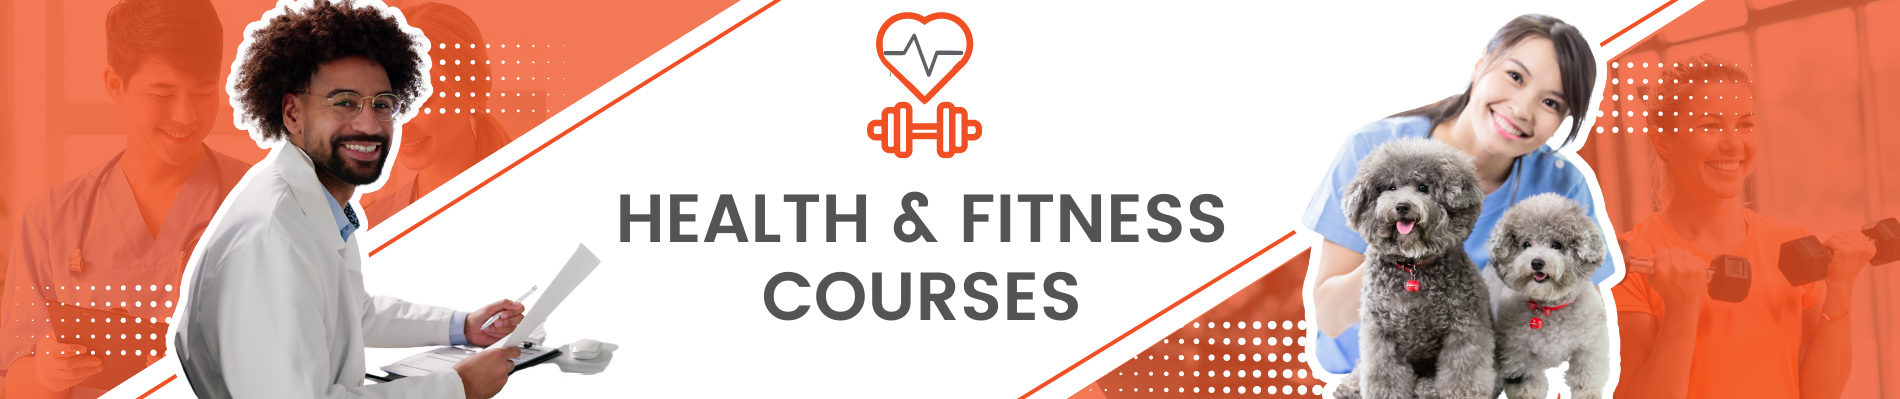 banner healthcare and fitness courses